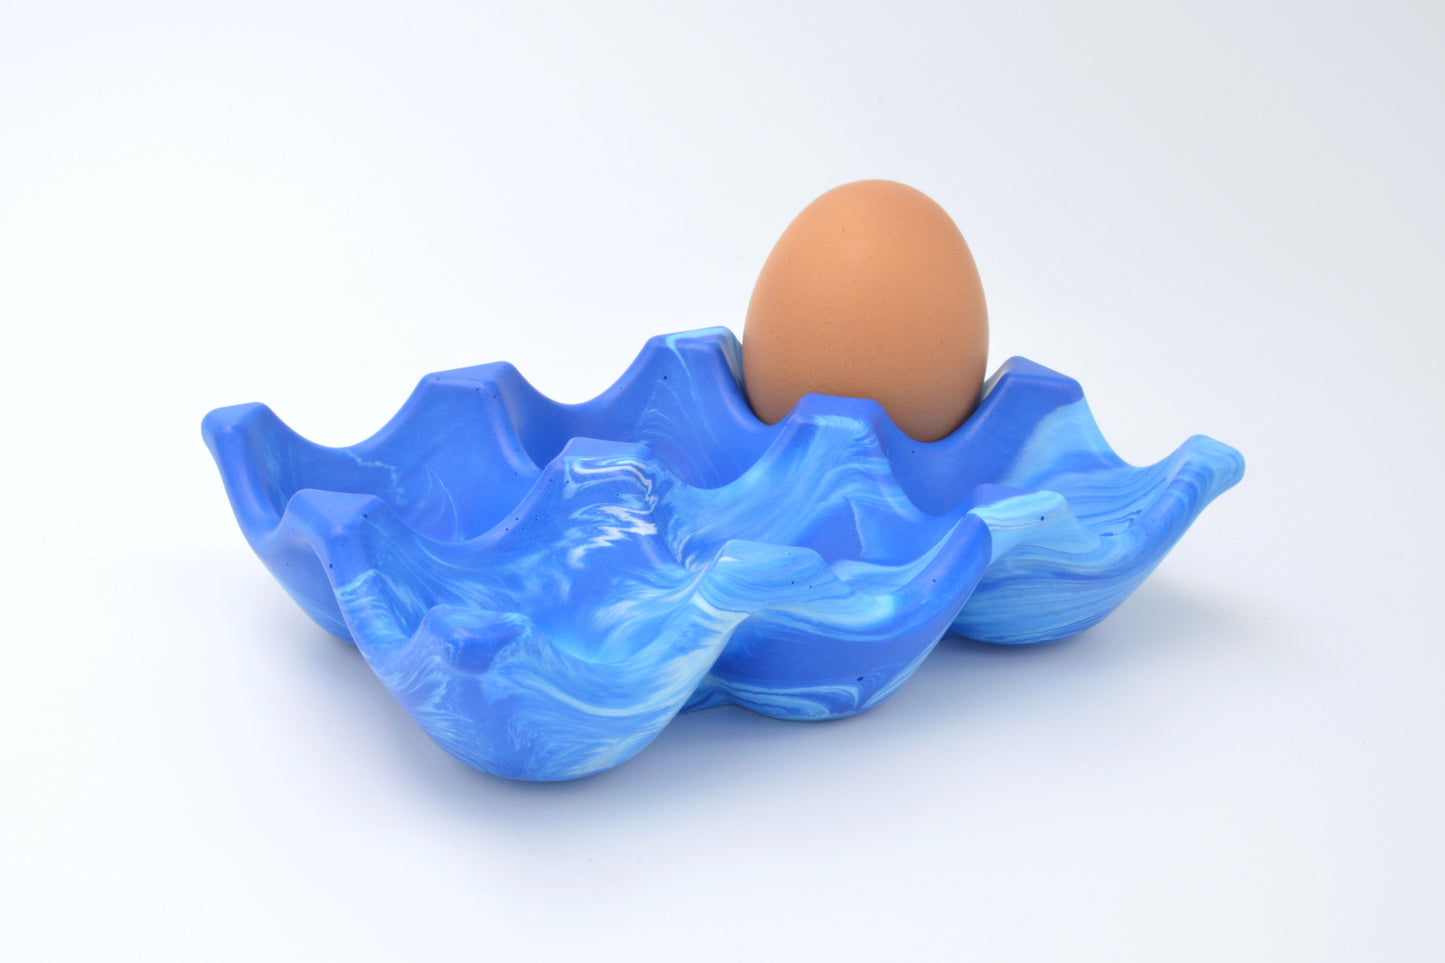 Countertop Egg Holder in Blue and White Stone